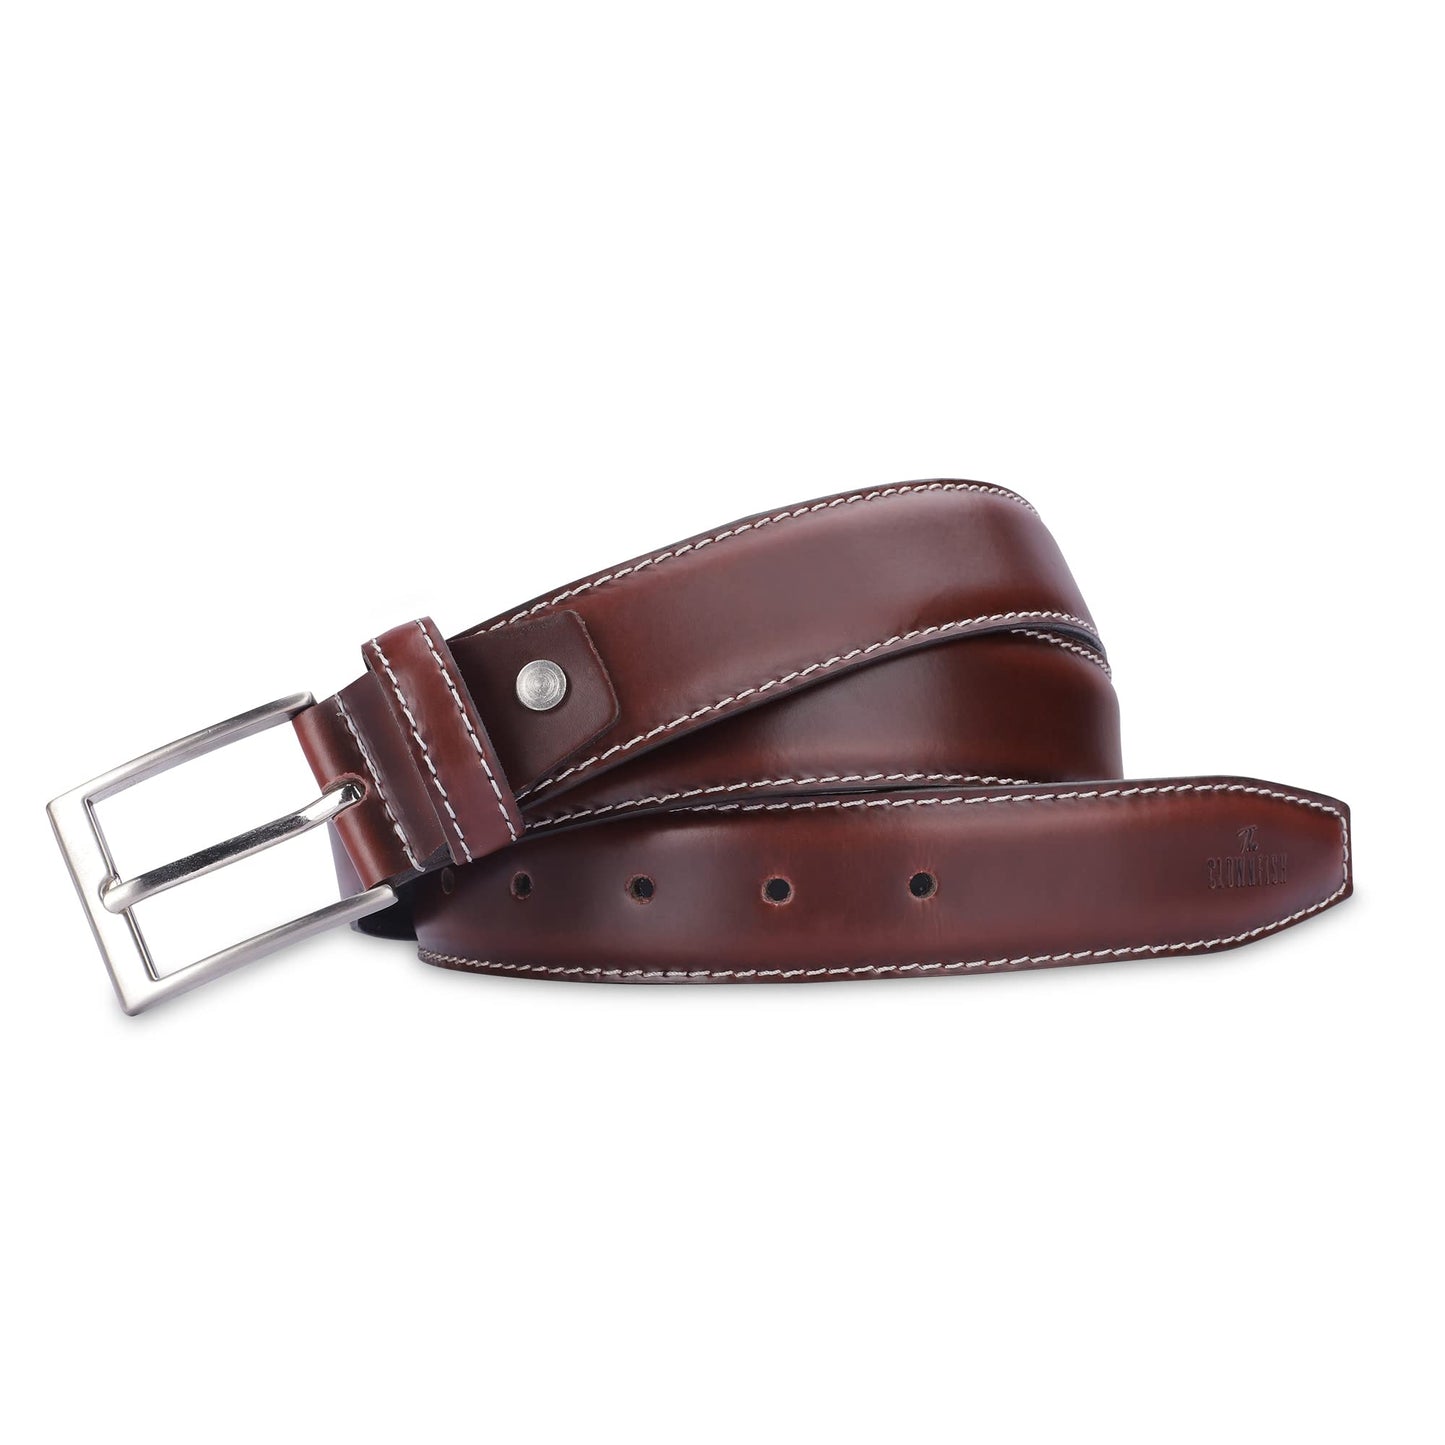 THE CLOWNFISH Men's Genuine Leather Belt - Maroon (Size-32 inches)